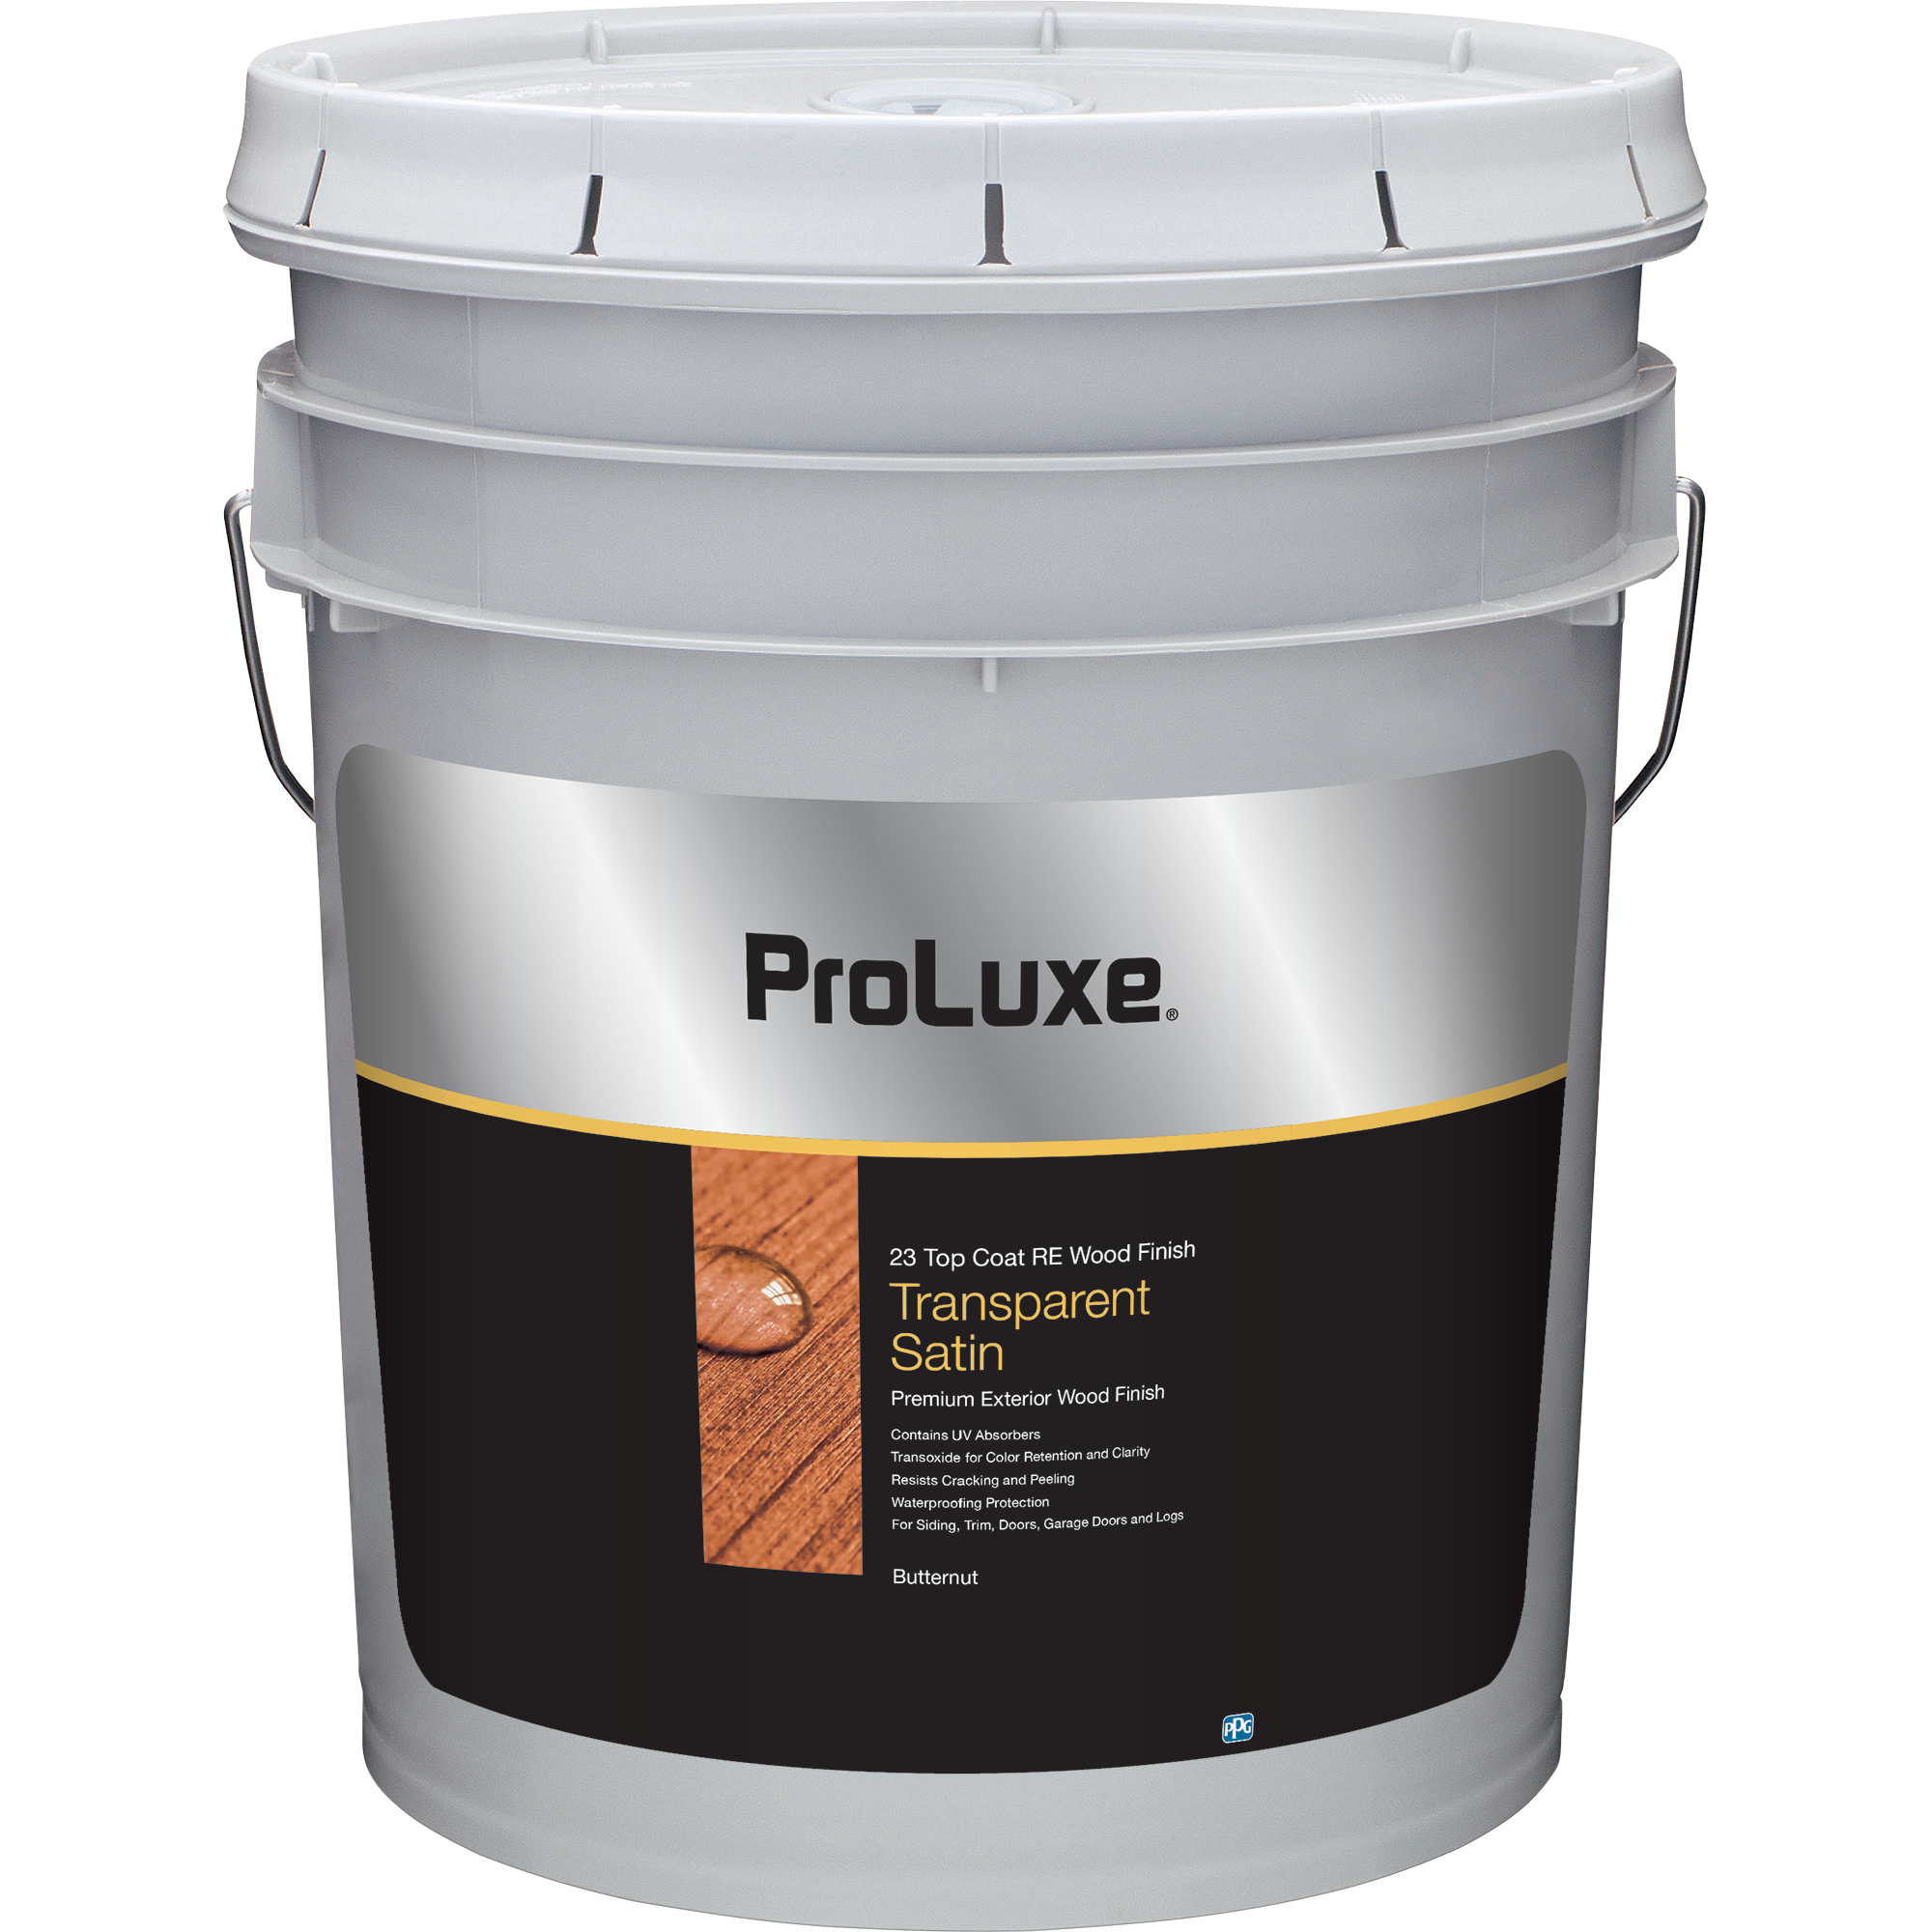  PROLUXE<sup>®</sup> 23 Top Coat RE Wood Finish 5 Gallon